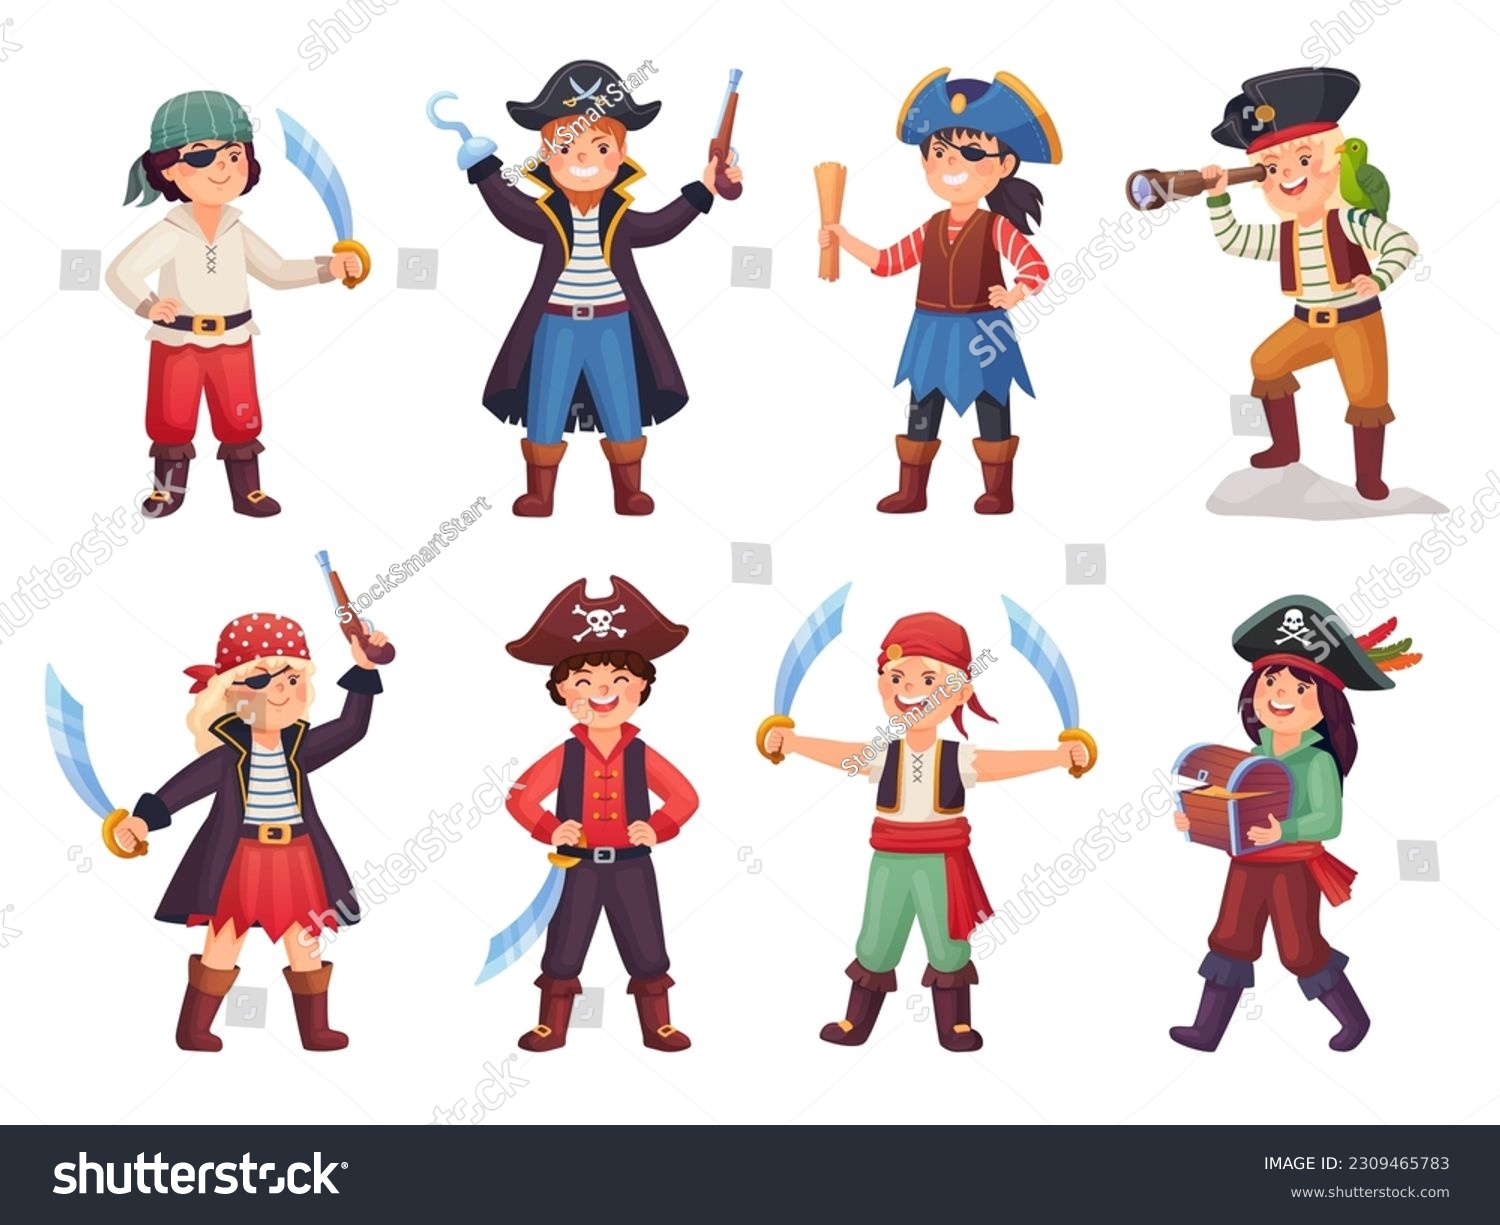 SVG of Kid pirate costumes. Child young pirates carnival costume, cartoon piratin fun character sea rover captain boy adventure sailor corsair girl buccaneer ingenious vector illustration of pirate carnival svg